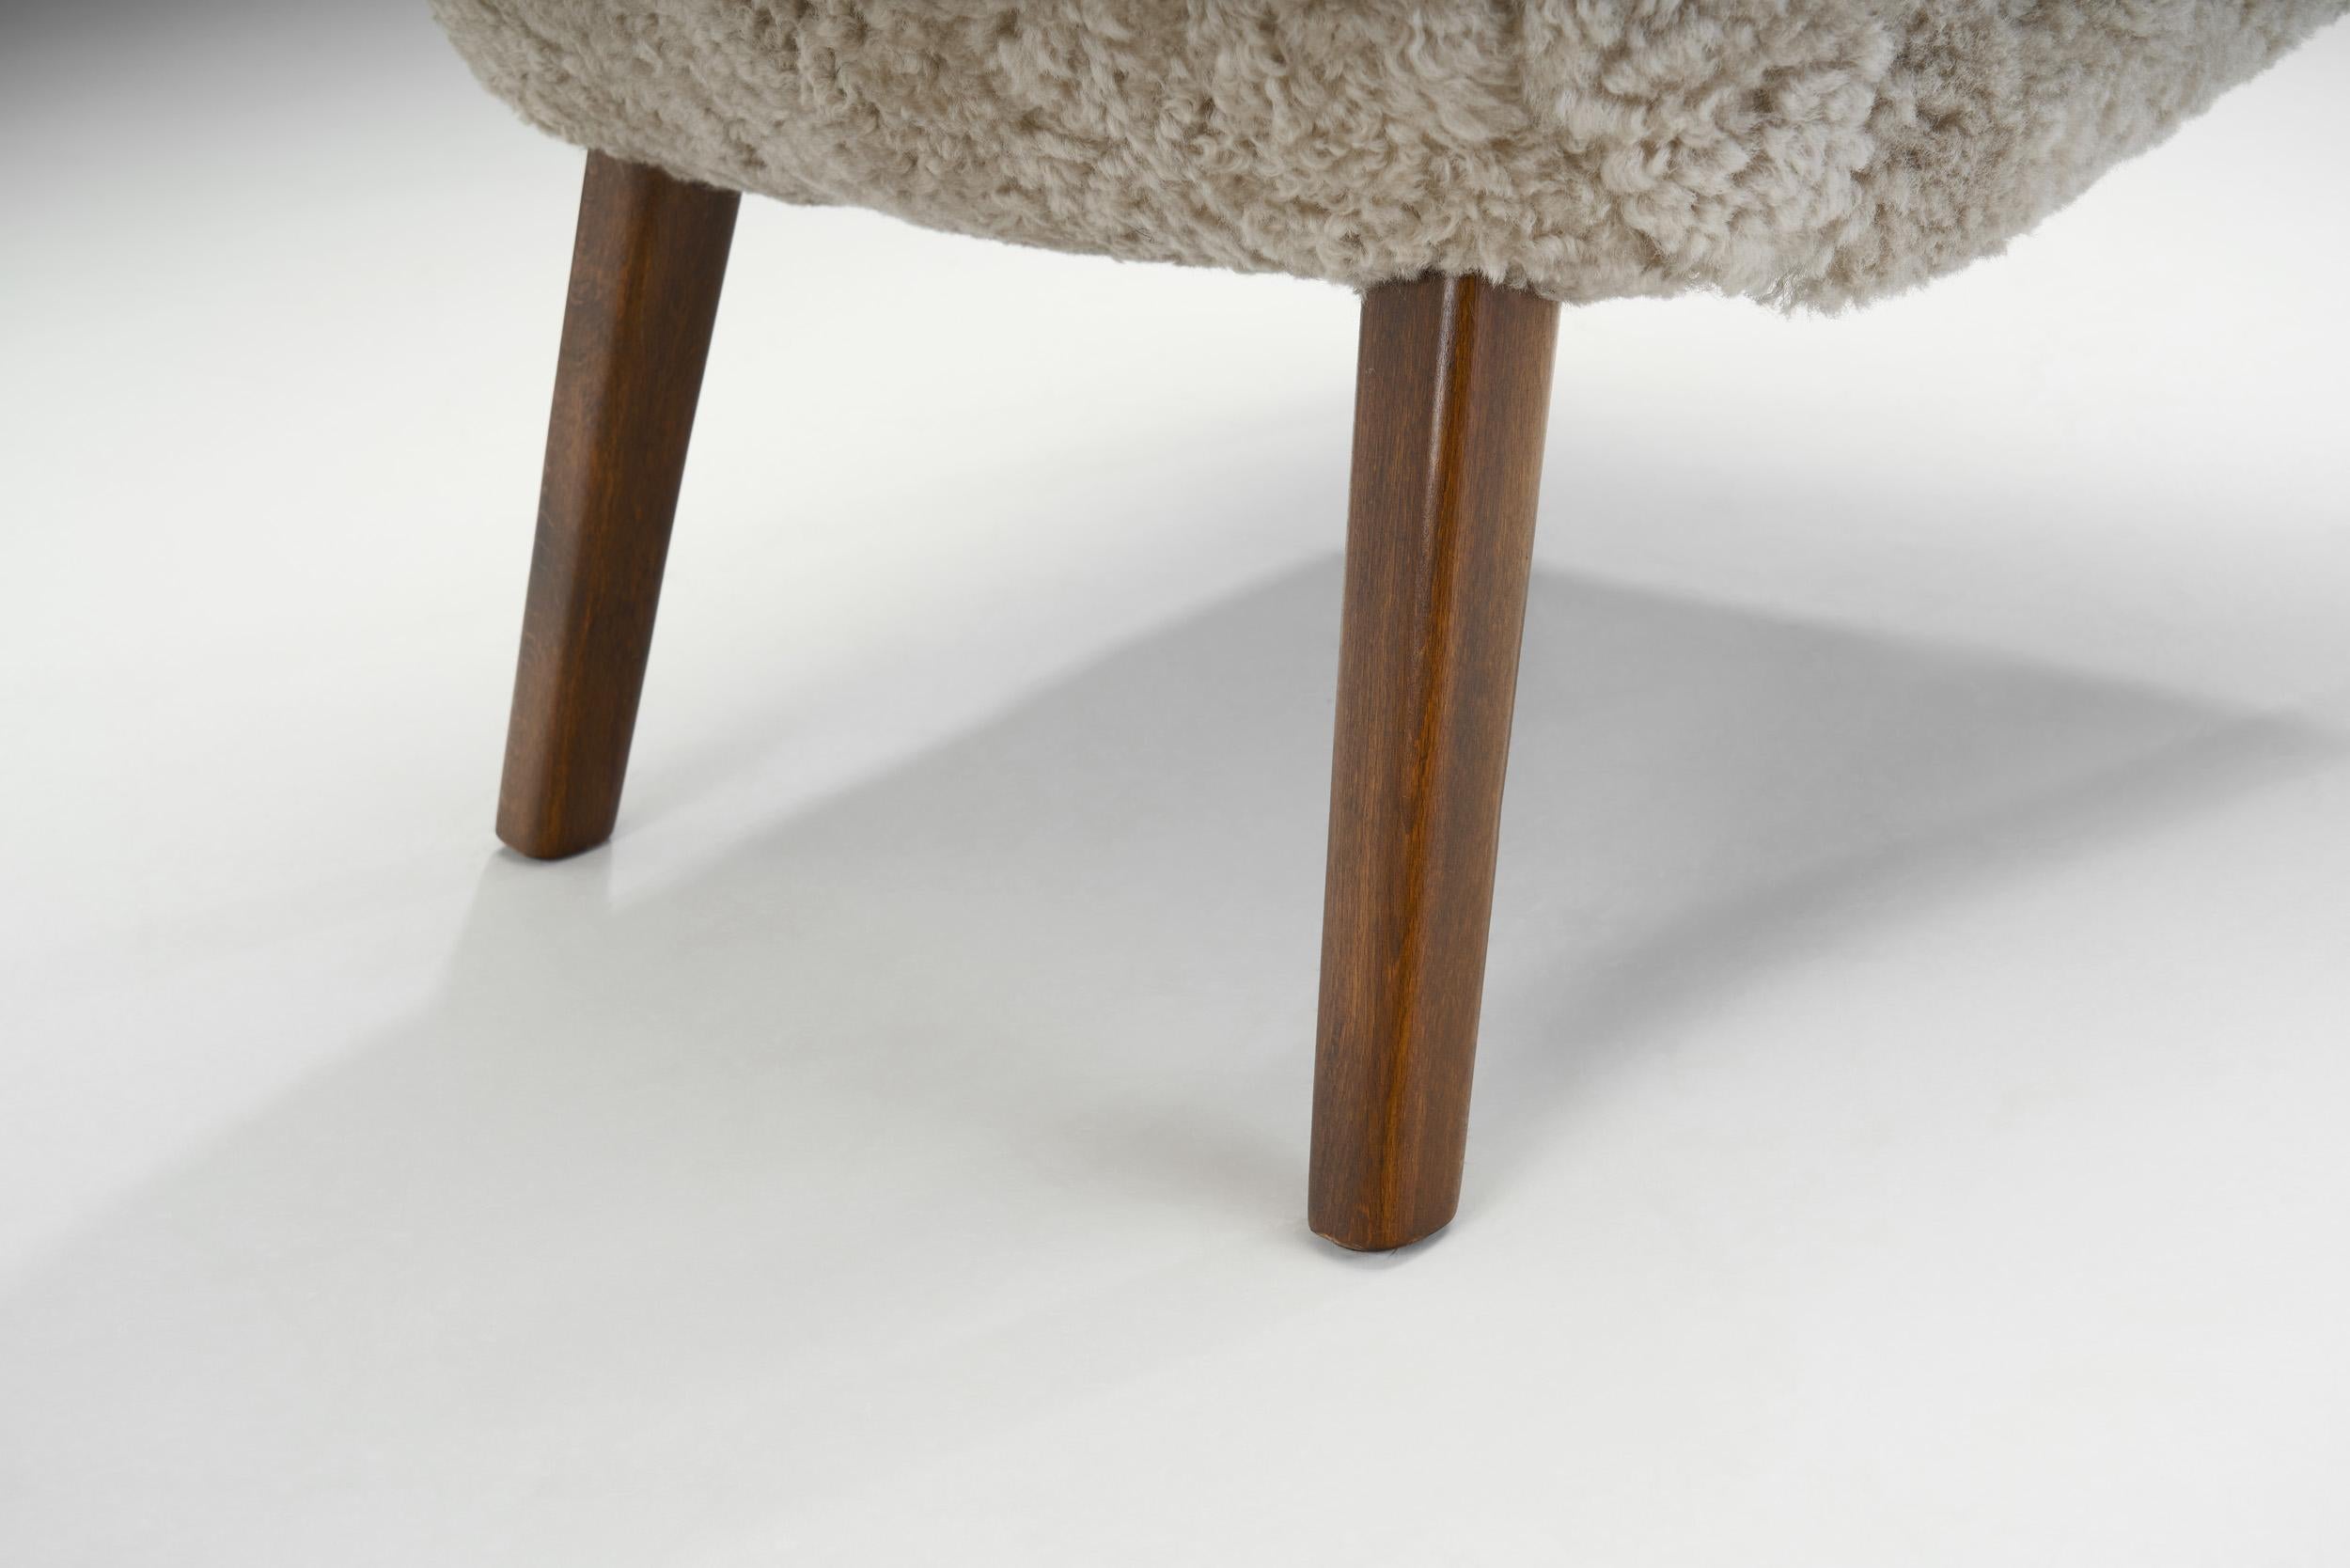 Stained Beech Easy Chairs in Sheepskin by a Danish Cabinetmaker, Denmark 1940s For Sale 11